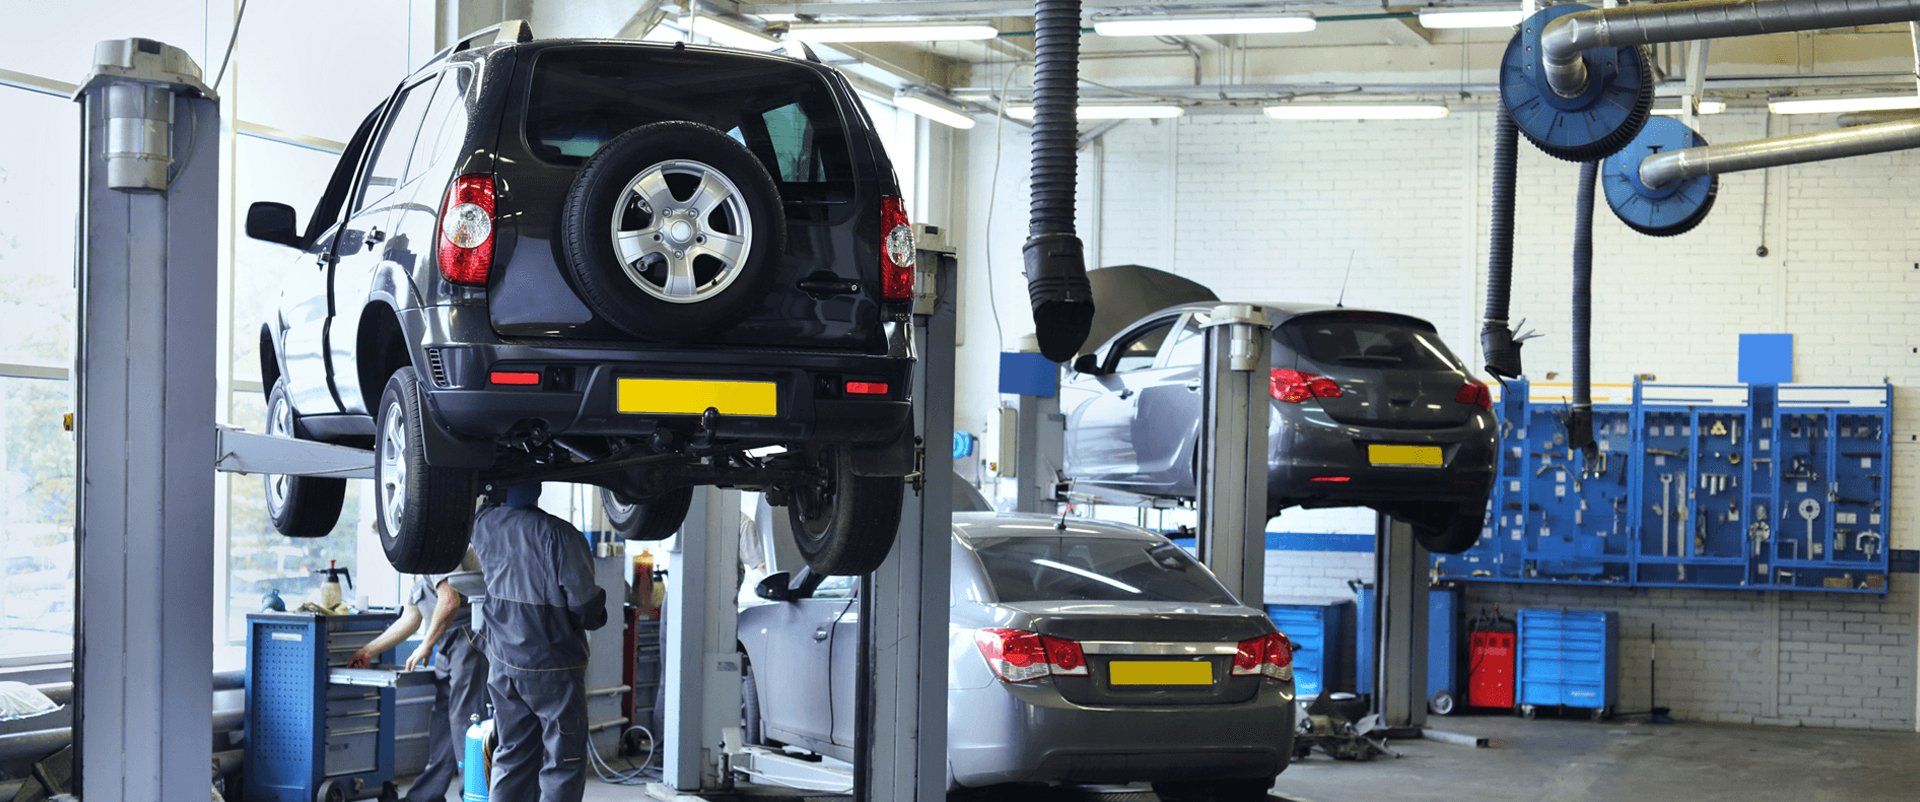 car servicing at a garage with top-class facility